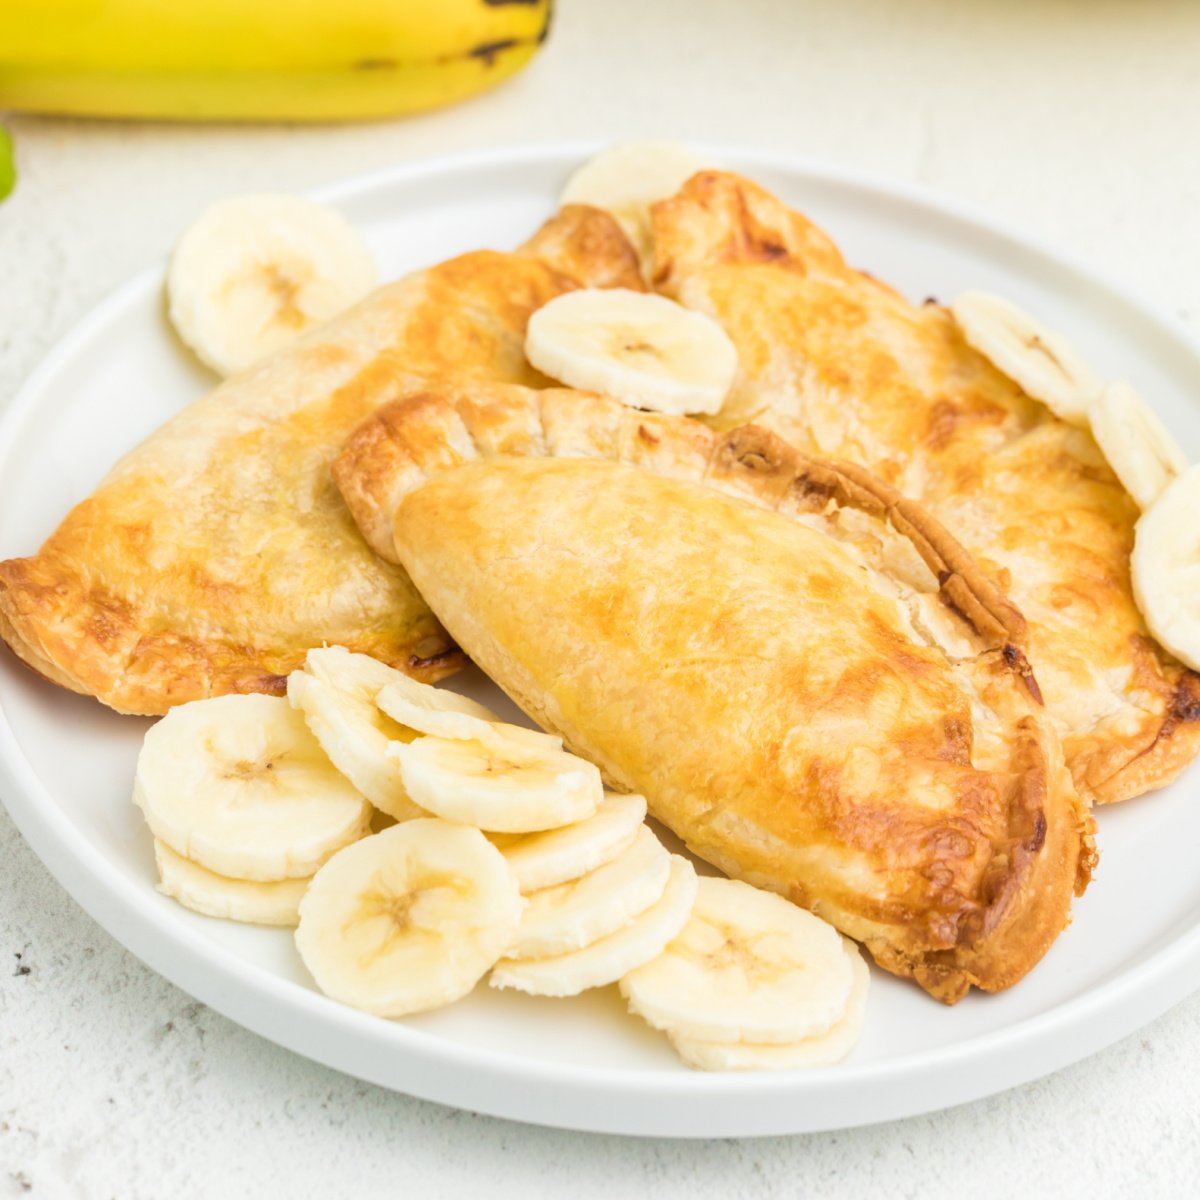 Air fried banana pudding pies on a white plate with sliced bananas.